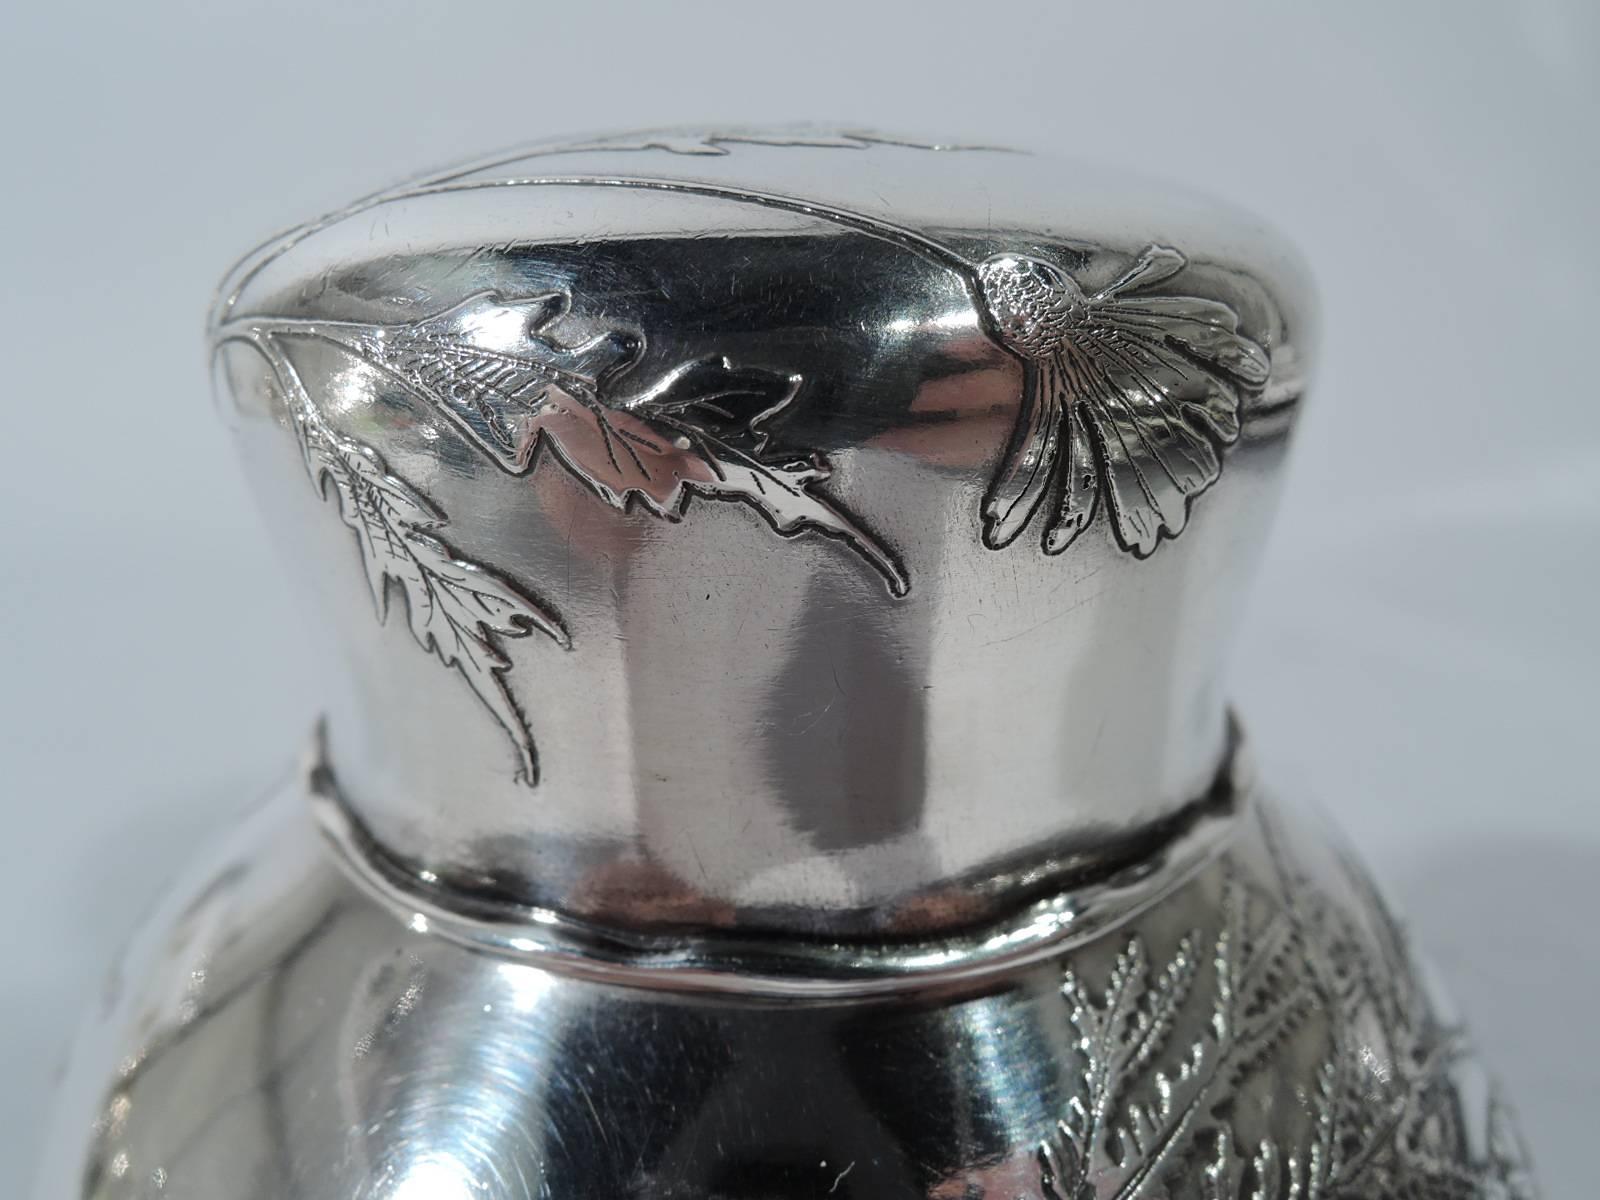 Japonisme Wonderful Tiffany Aesthetic Japonesque Sterling Silver Tea Caddy